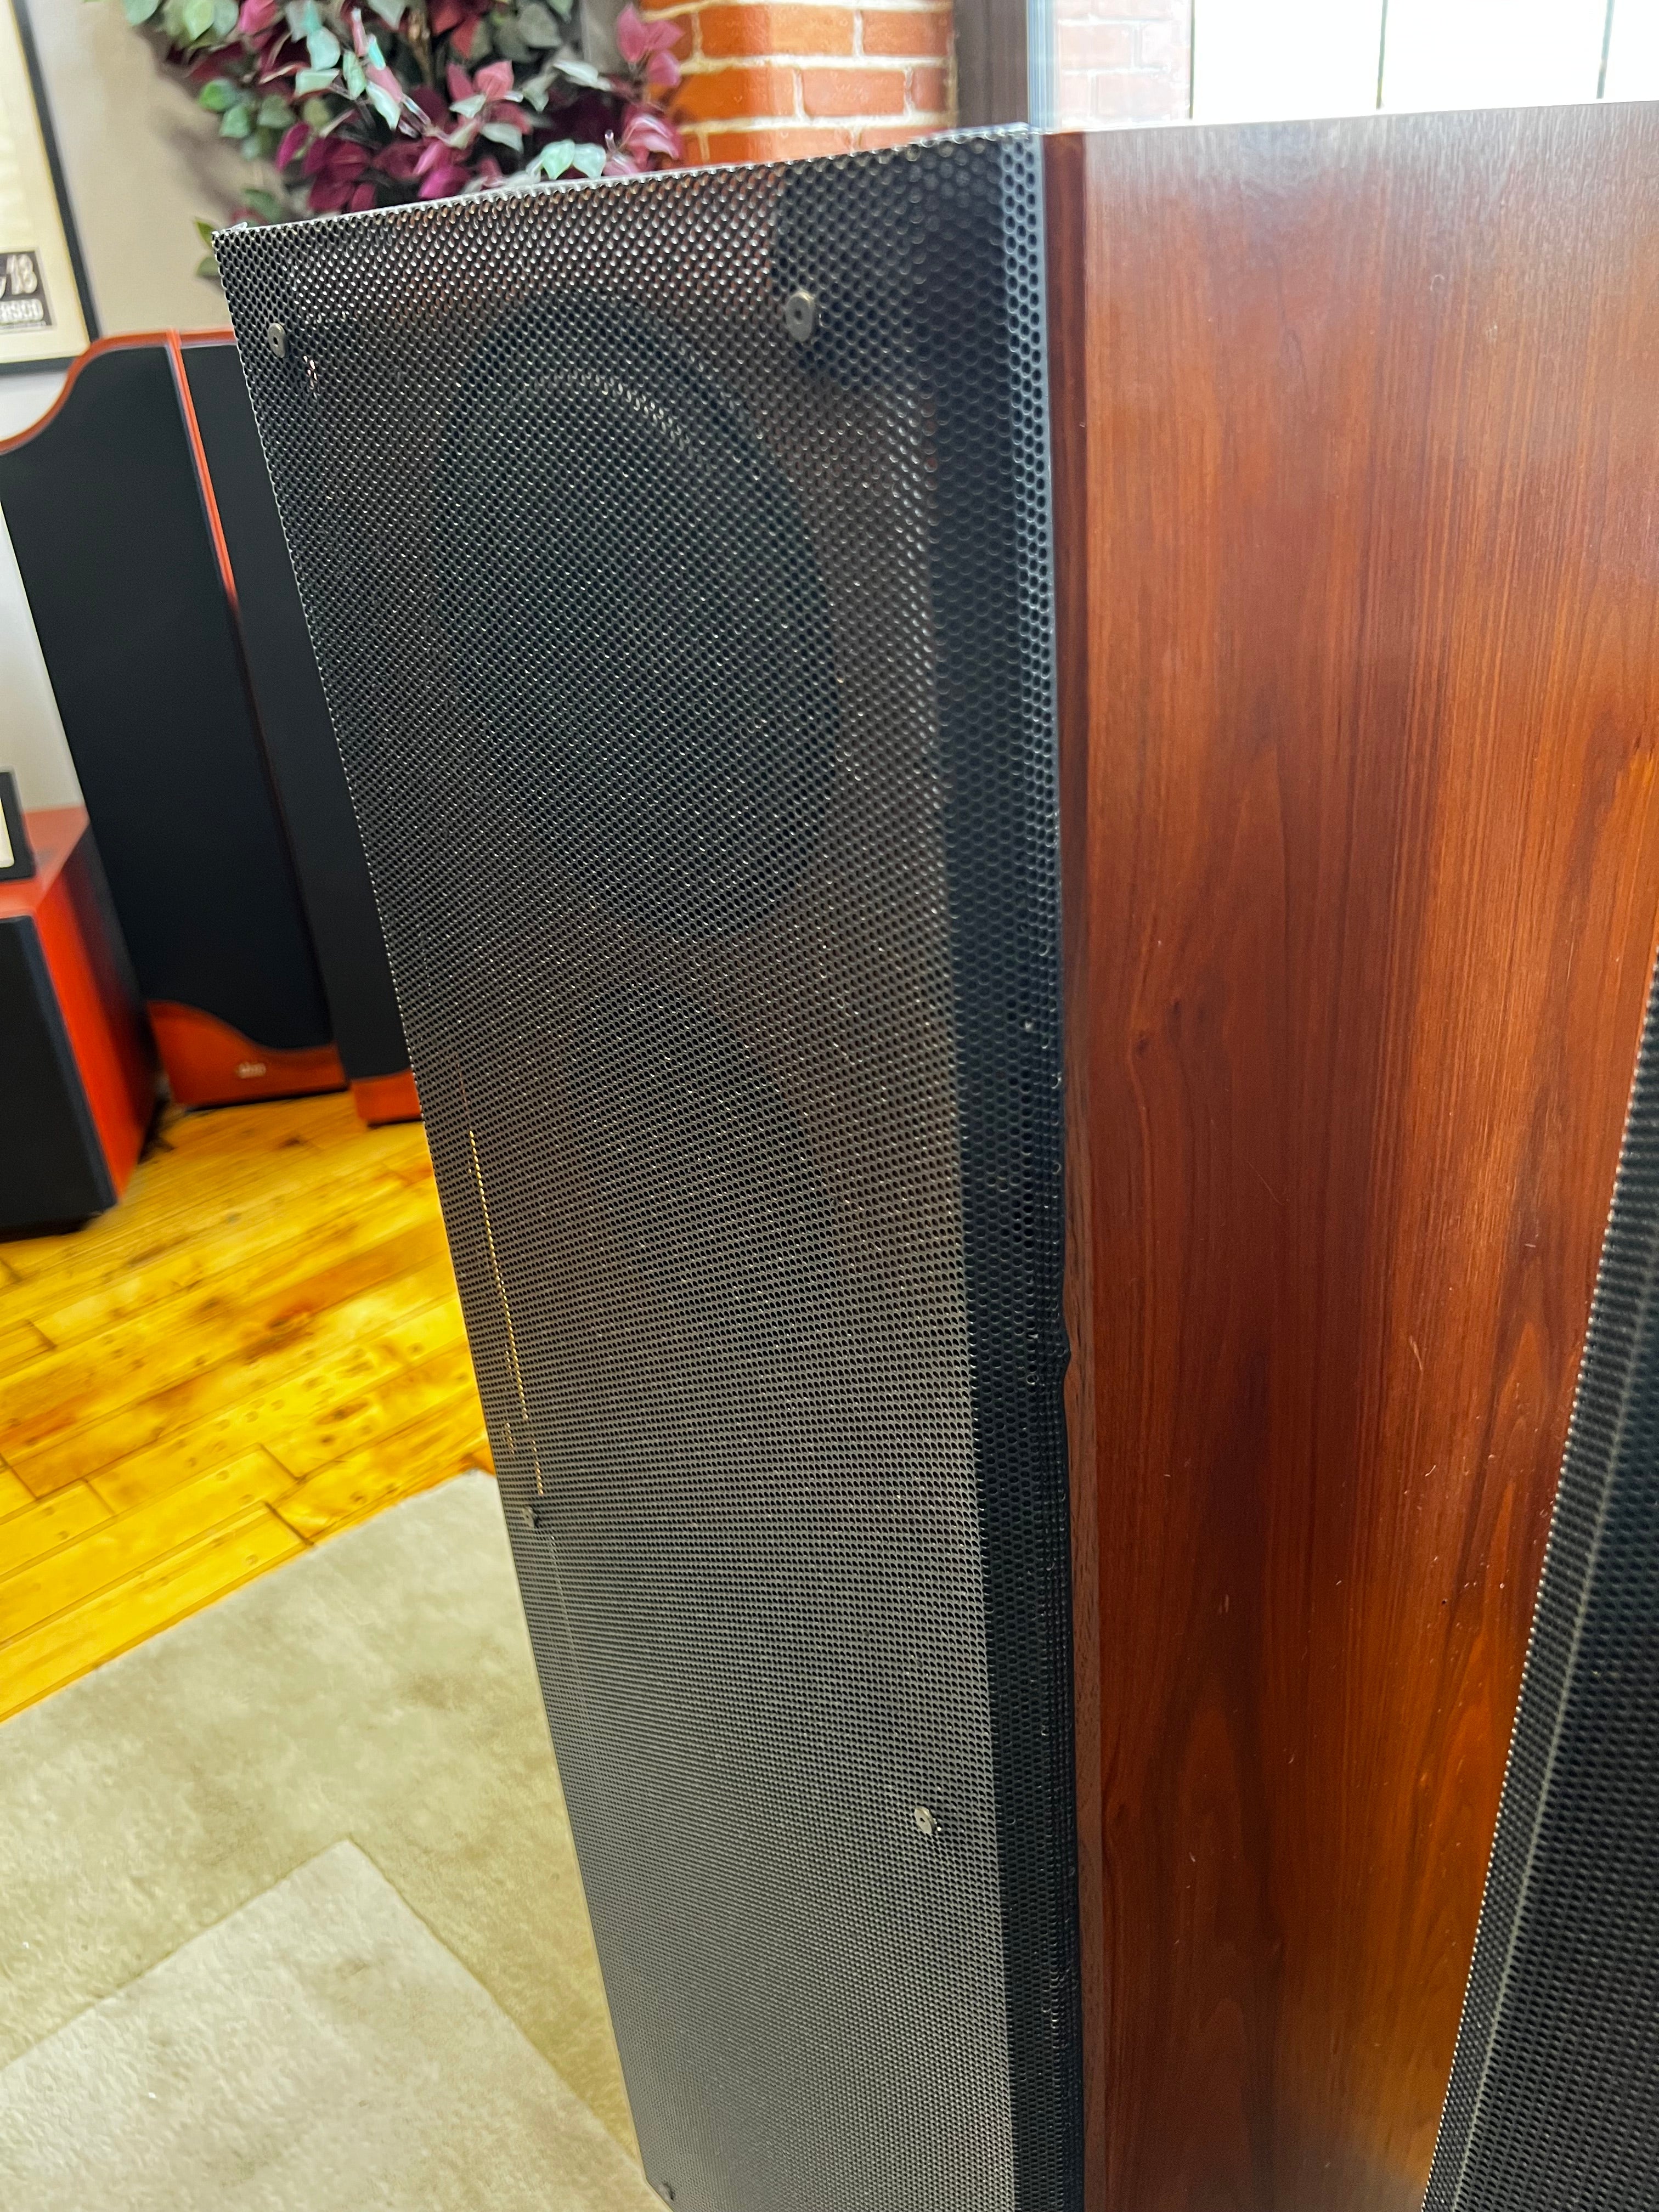 ADS L12/90 Classic Tower Speakers - SOLD